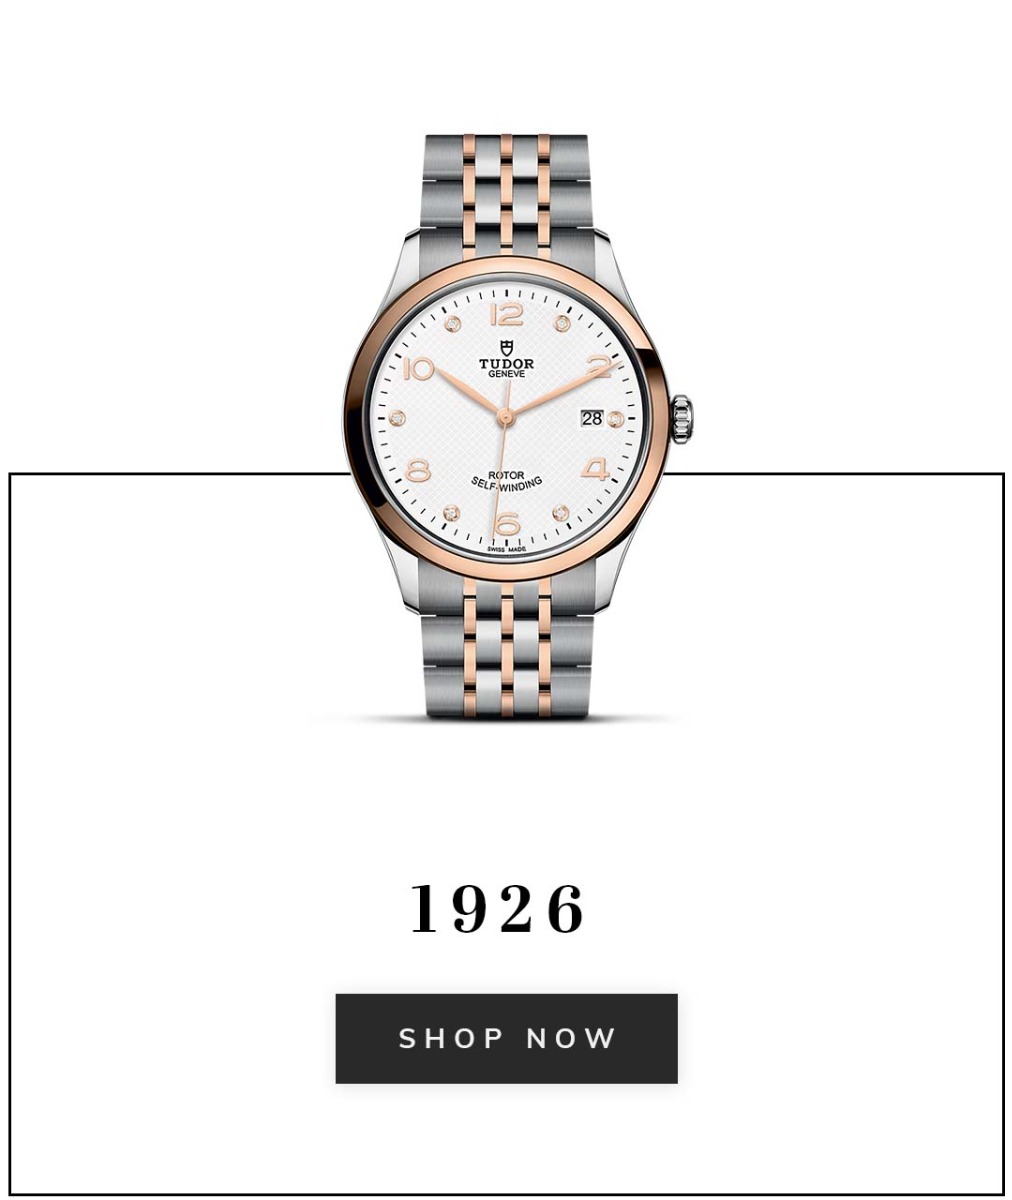 A 1926 watch with text shop now